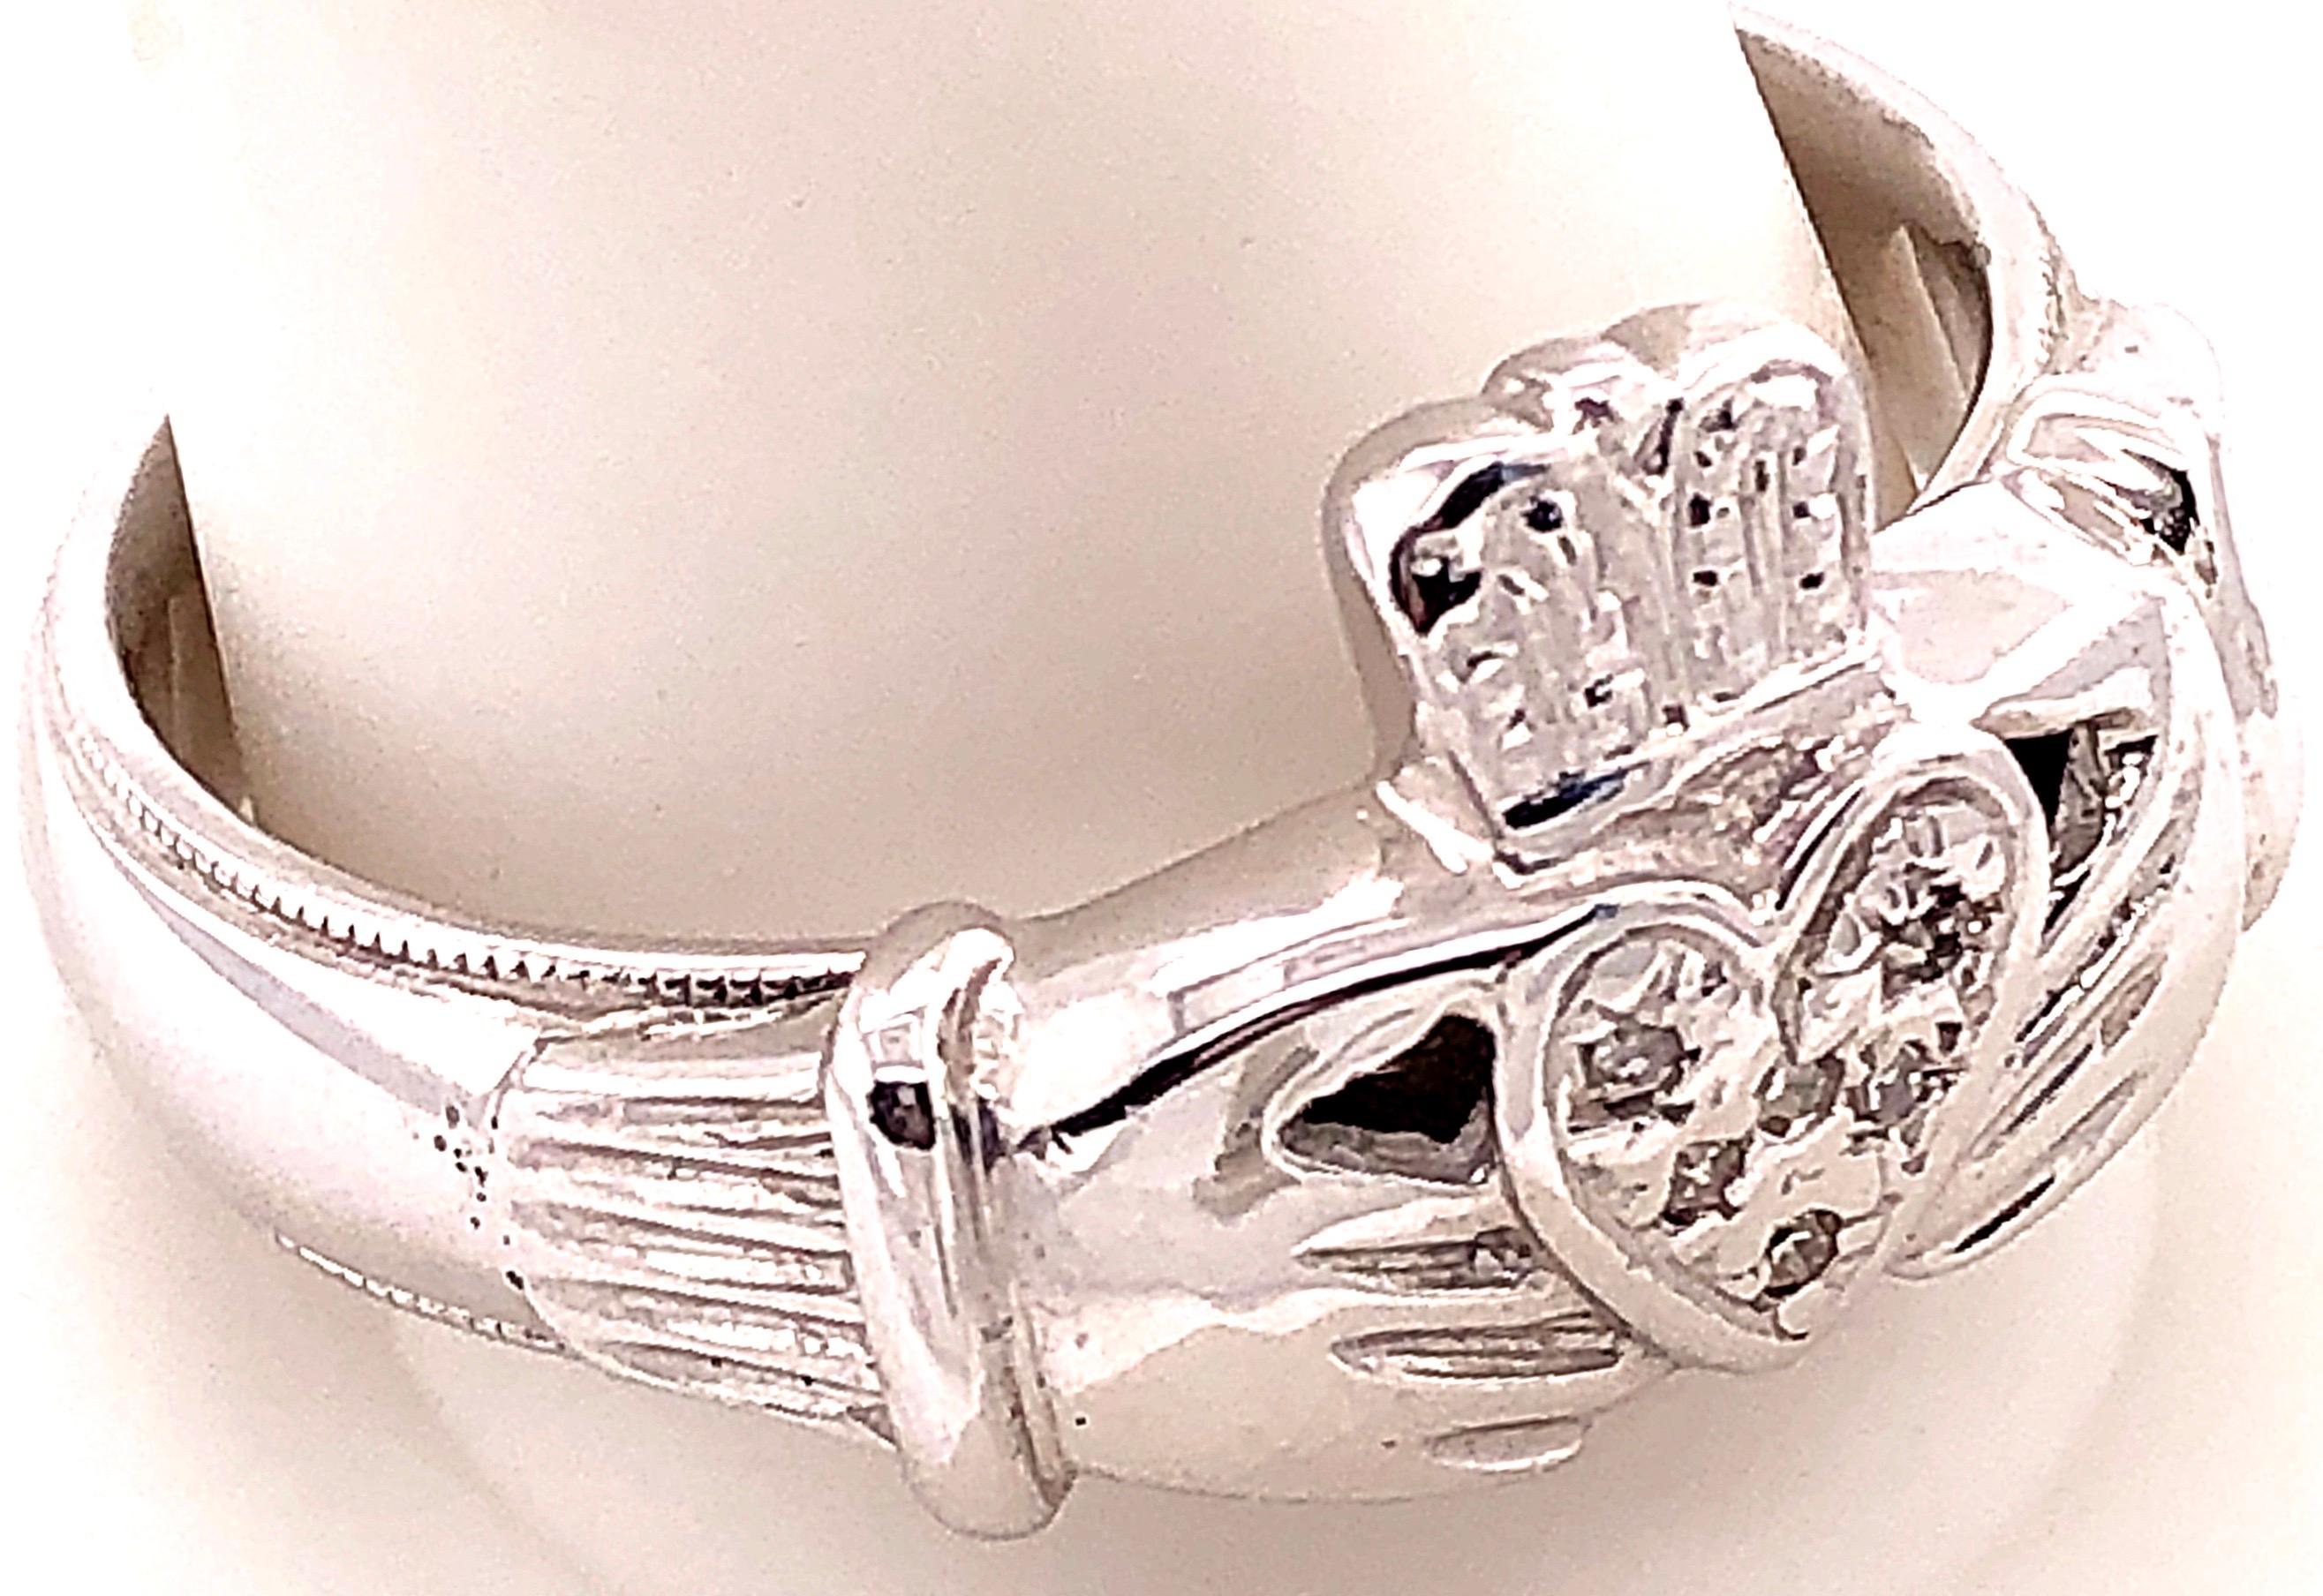 Contemporary 14 Karat White Gold Claddagh Diamond Ring For Sale